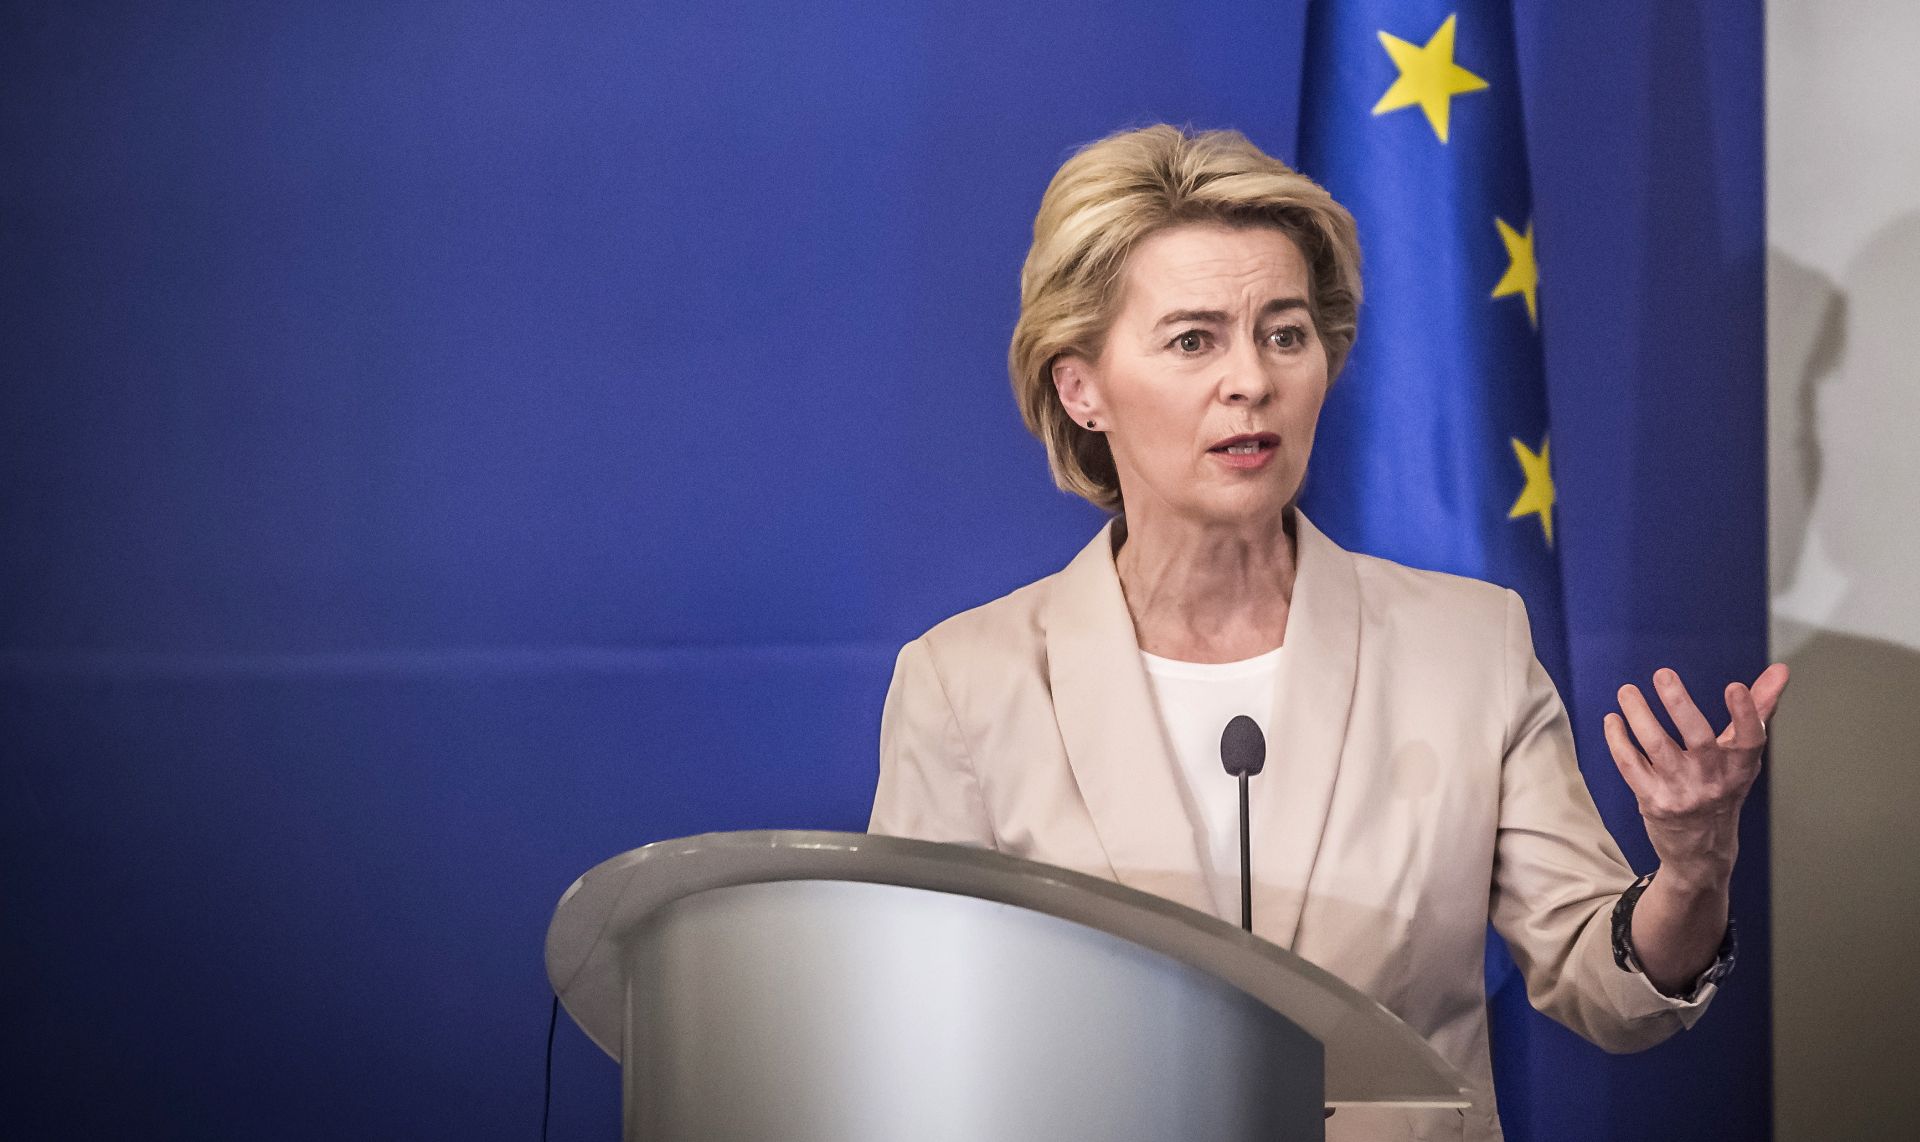 epa07801006 President-elect of the European Commission Ursula von der Leyen speaks during an official visit in Sofia, Bulgaria, 29 August 2019. President of the European Commission Ursula von der Leyen arrived for an official visit to Sofia.  EPA/Borislav Troshev